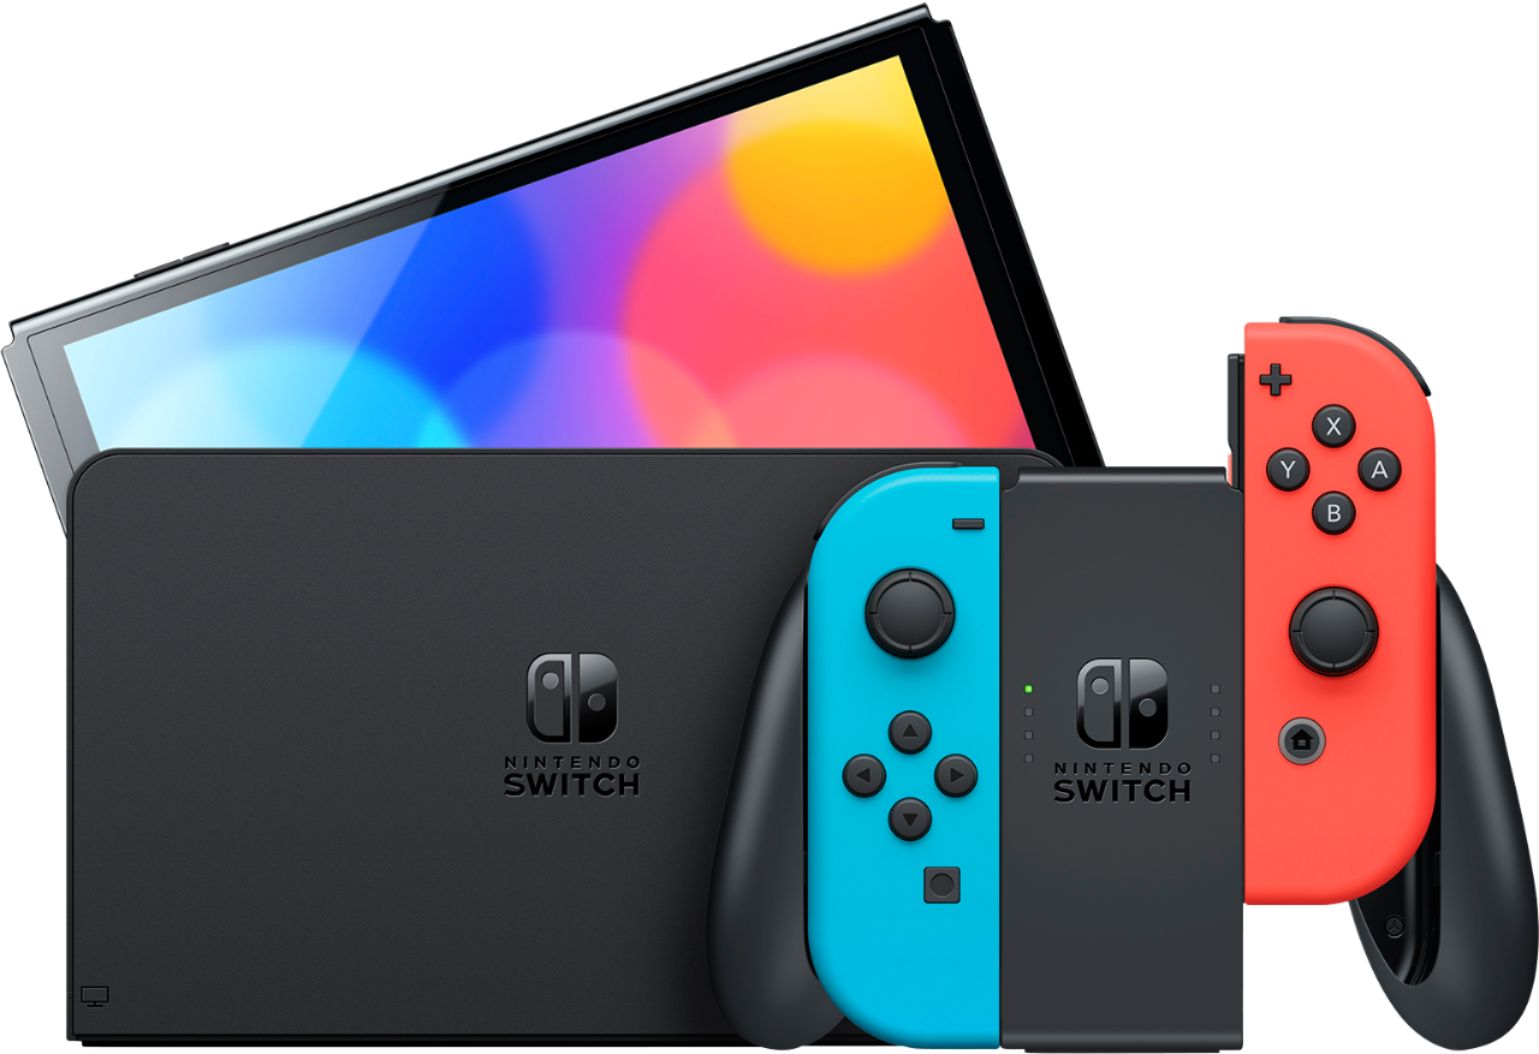 2022 New Nintendo Switch OLED Model Neon Red Blue with Mario Rabbids Kingdom Battle and Mytrix Full Body Skin Sticker for NS OLED Console, Dock and Joycons - Sakura Pink